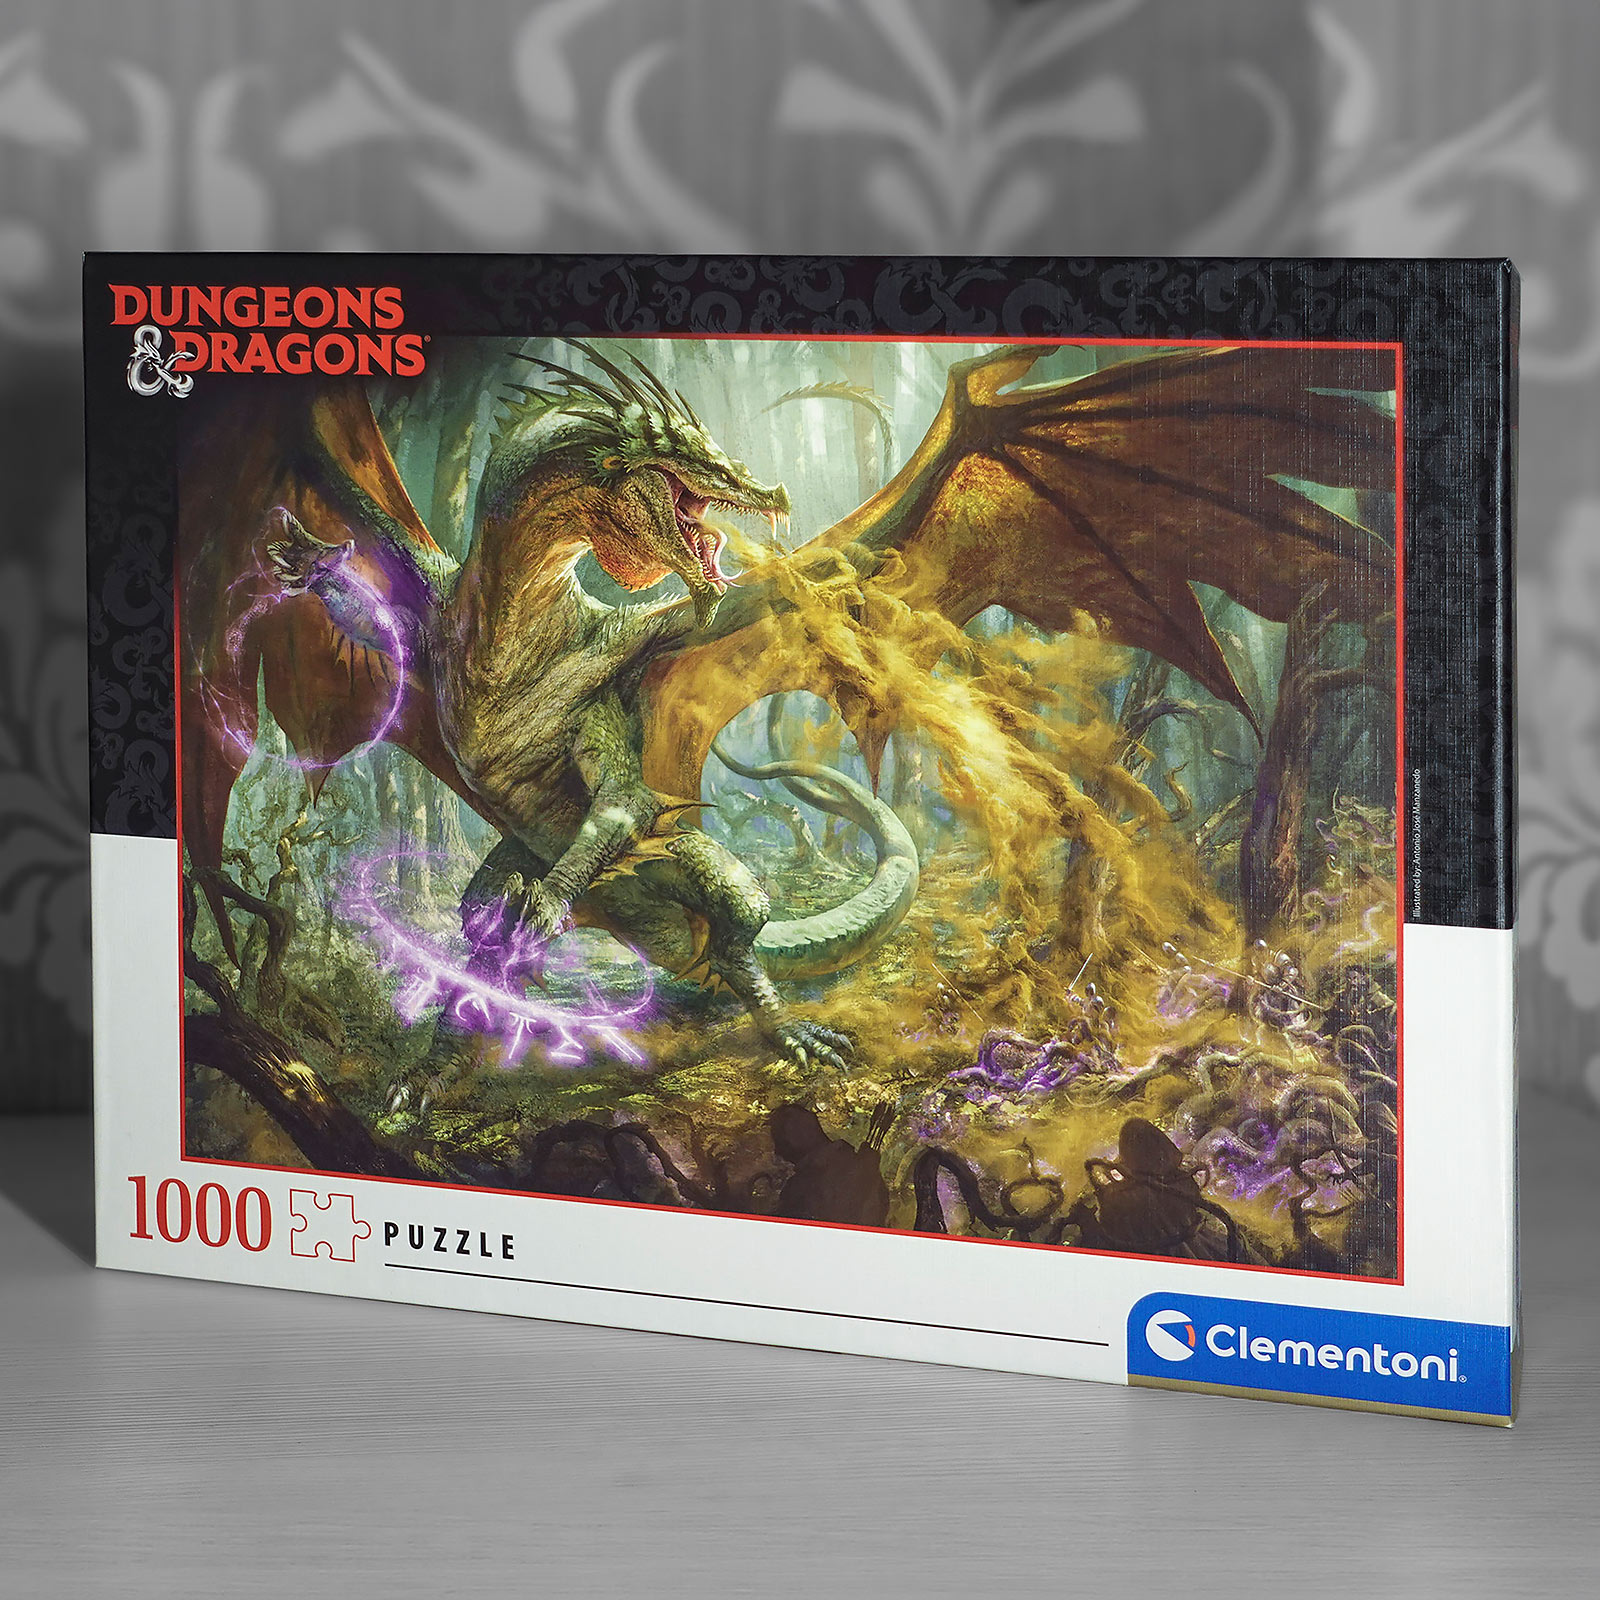 Dungeons & Dragons - Puzzle